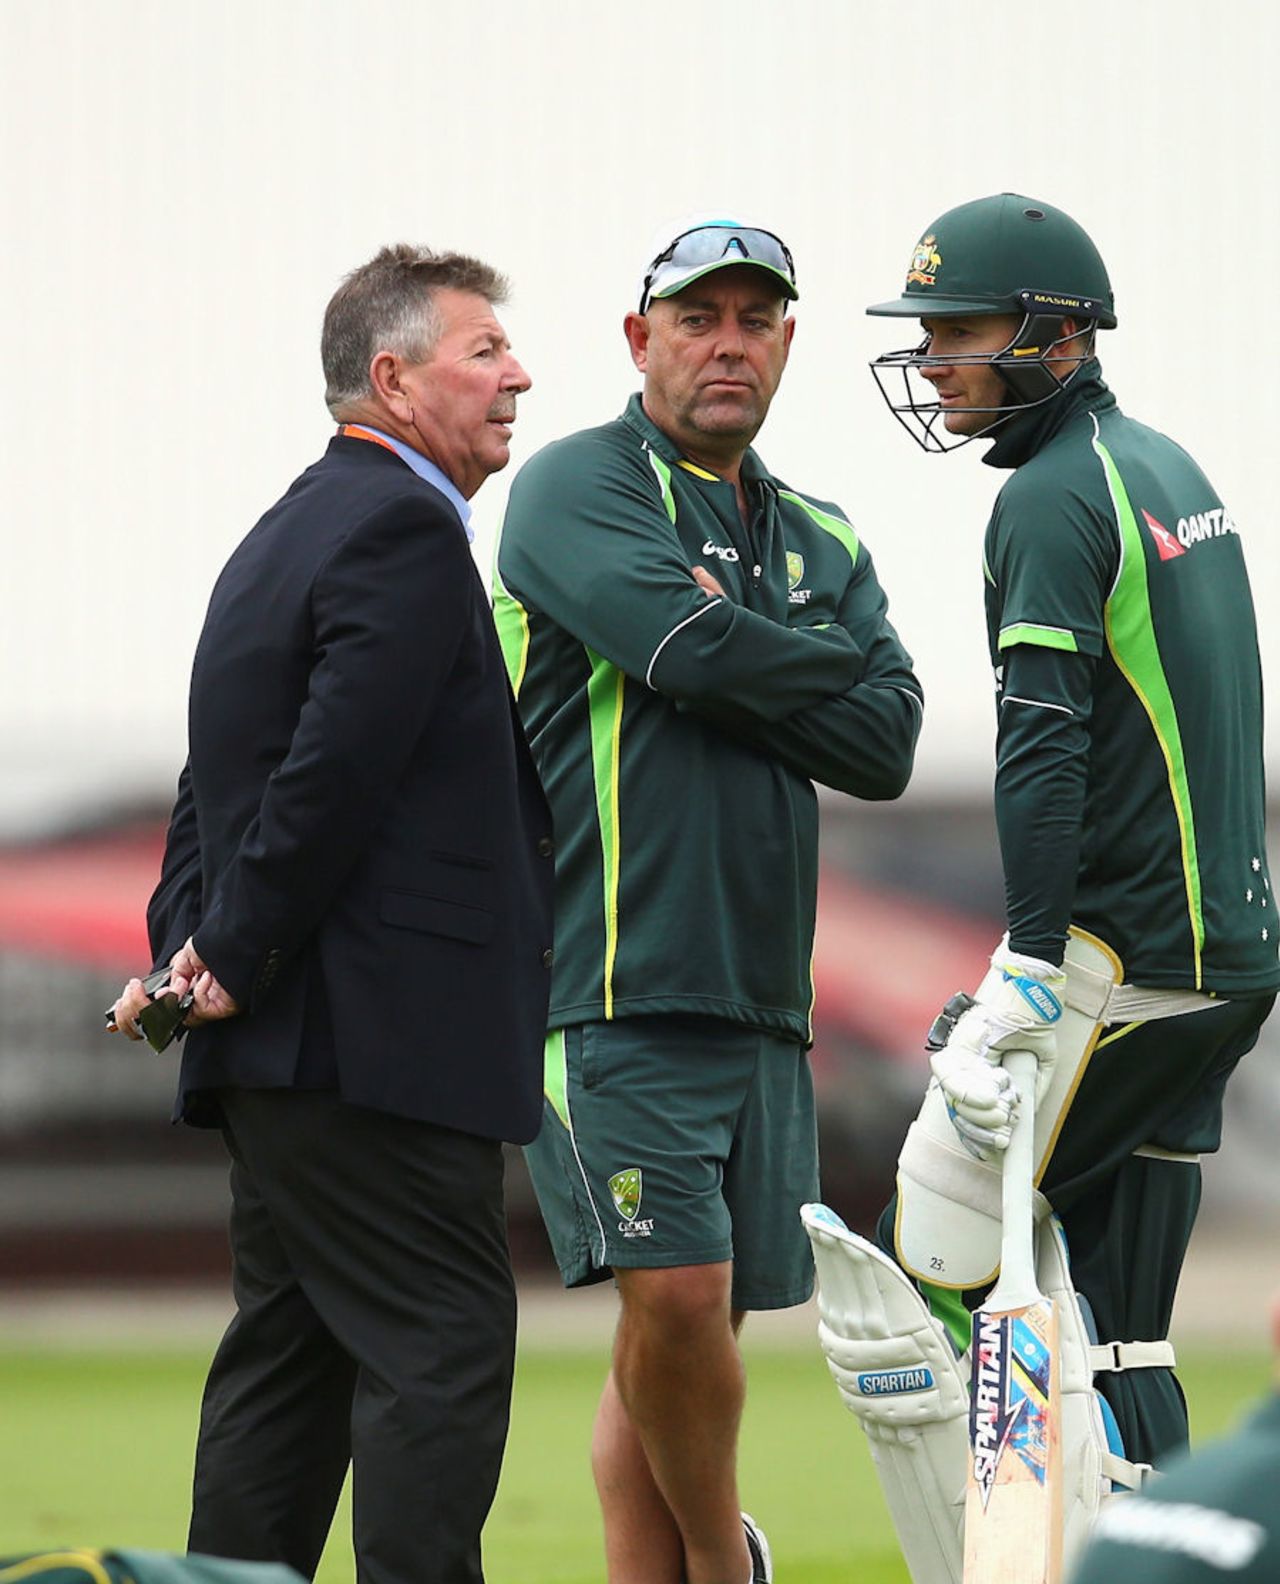 Austrralian captain Michael Clarke chats ahead of his final Test to chairman of selectors Rod Marsh (left) and coach Darren Lehmann during practice at The Oval